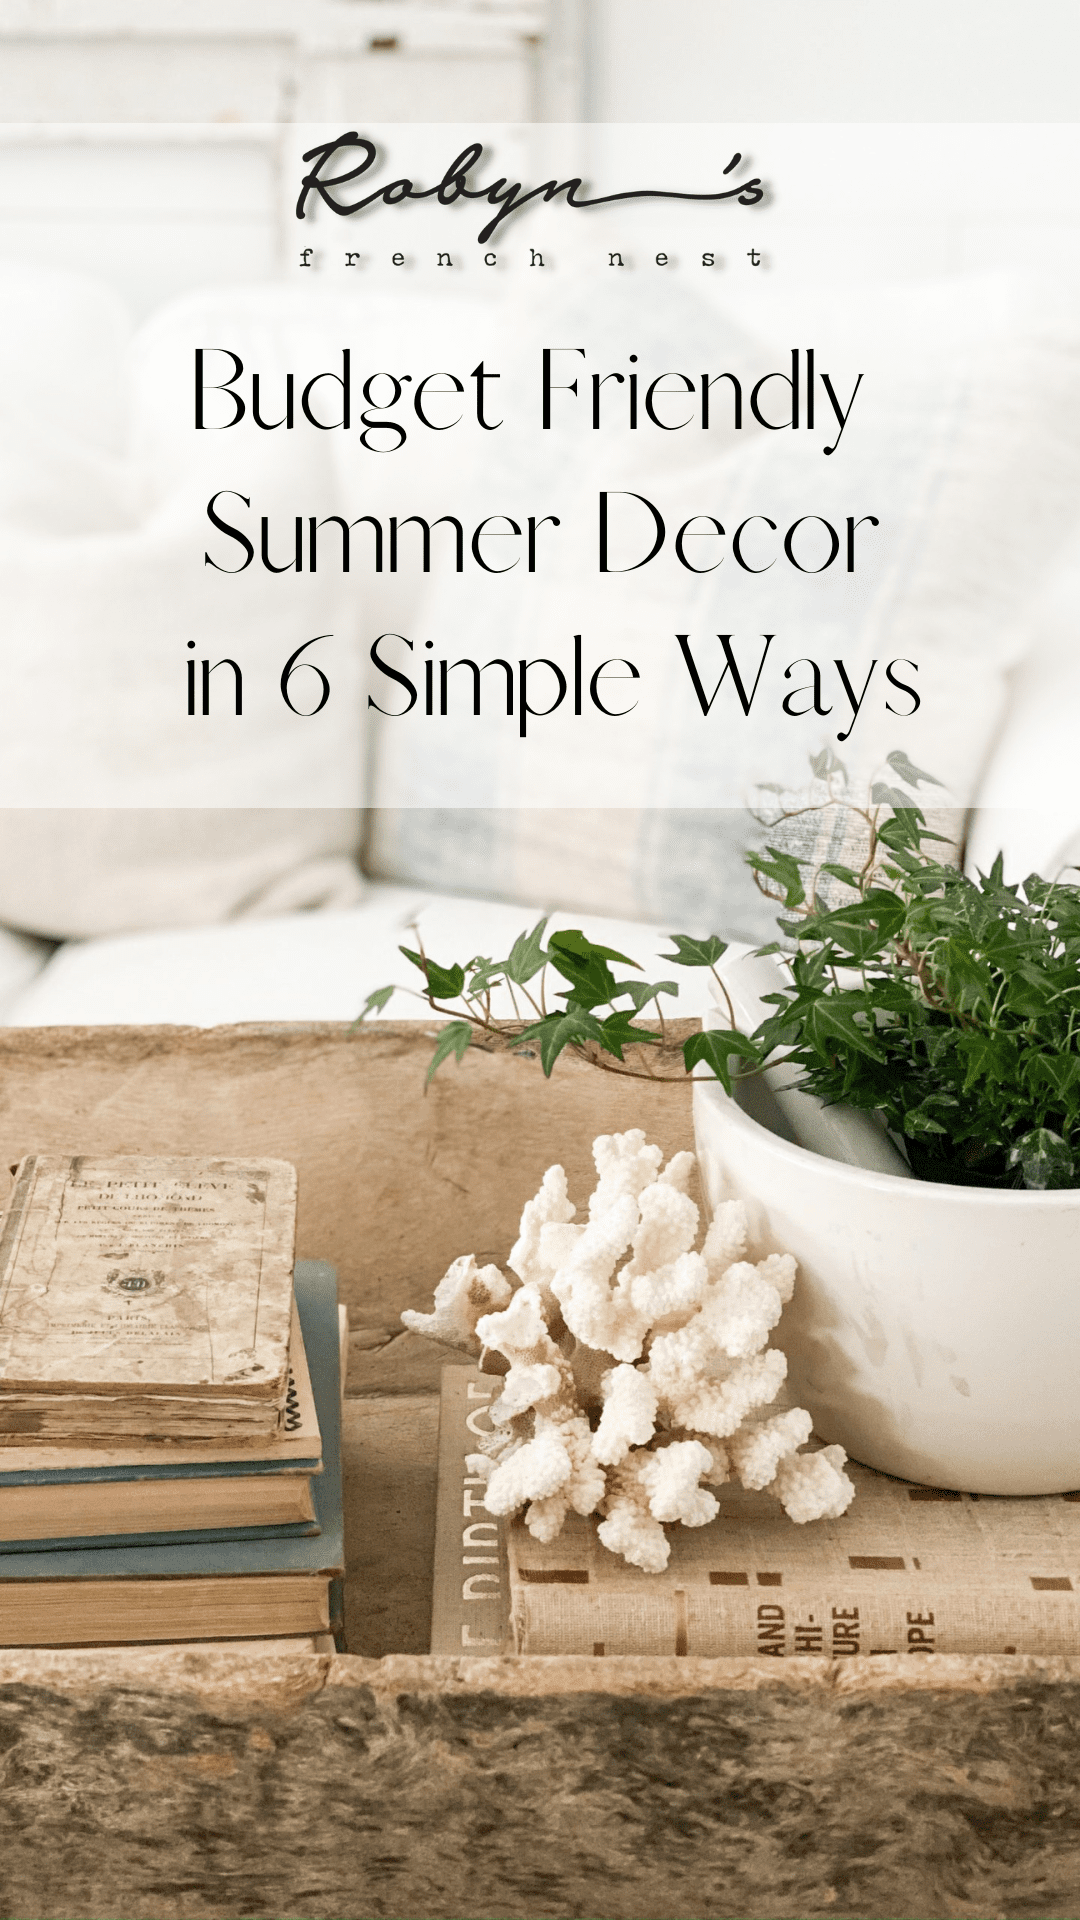 How to Create Budget-Friendly Summer Home Decor in 6 Simple Ways